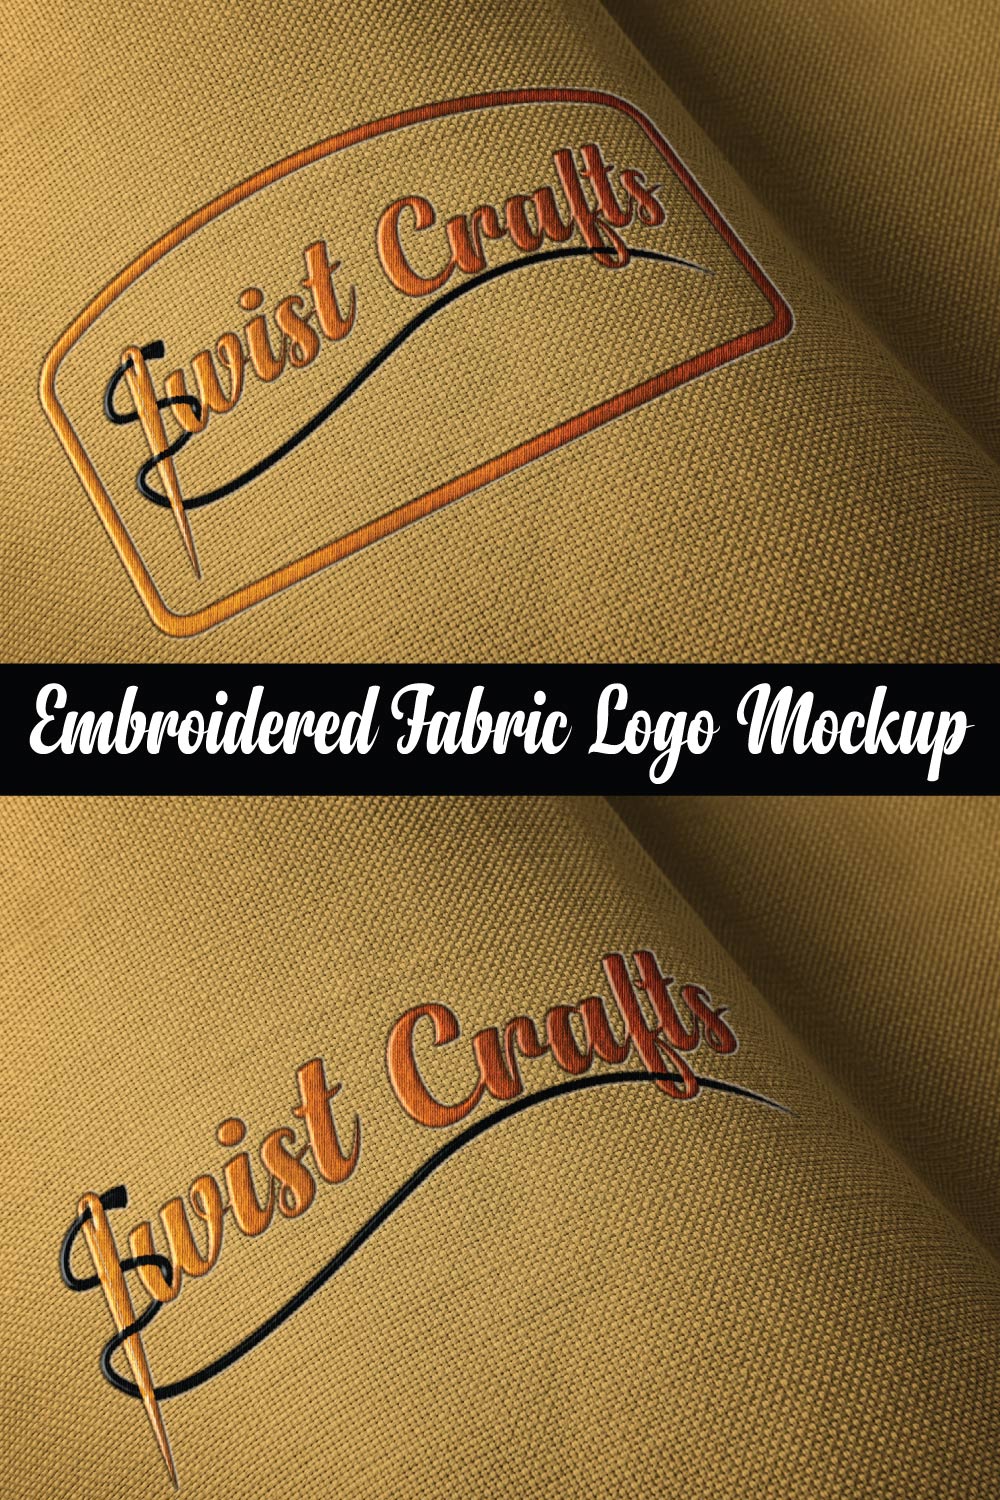 Embroidered Fabric Logo Mockup PSD file pinterest preview image.